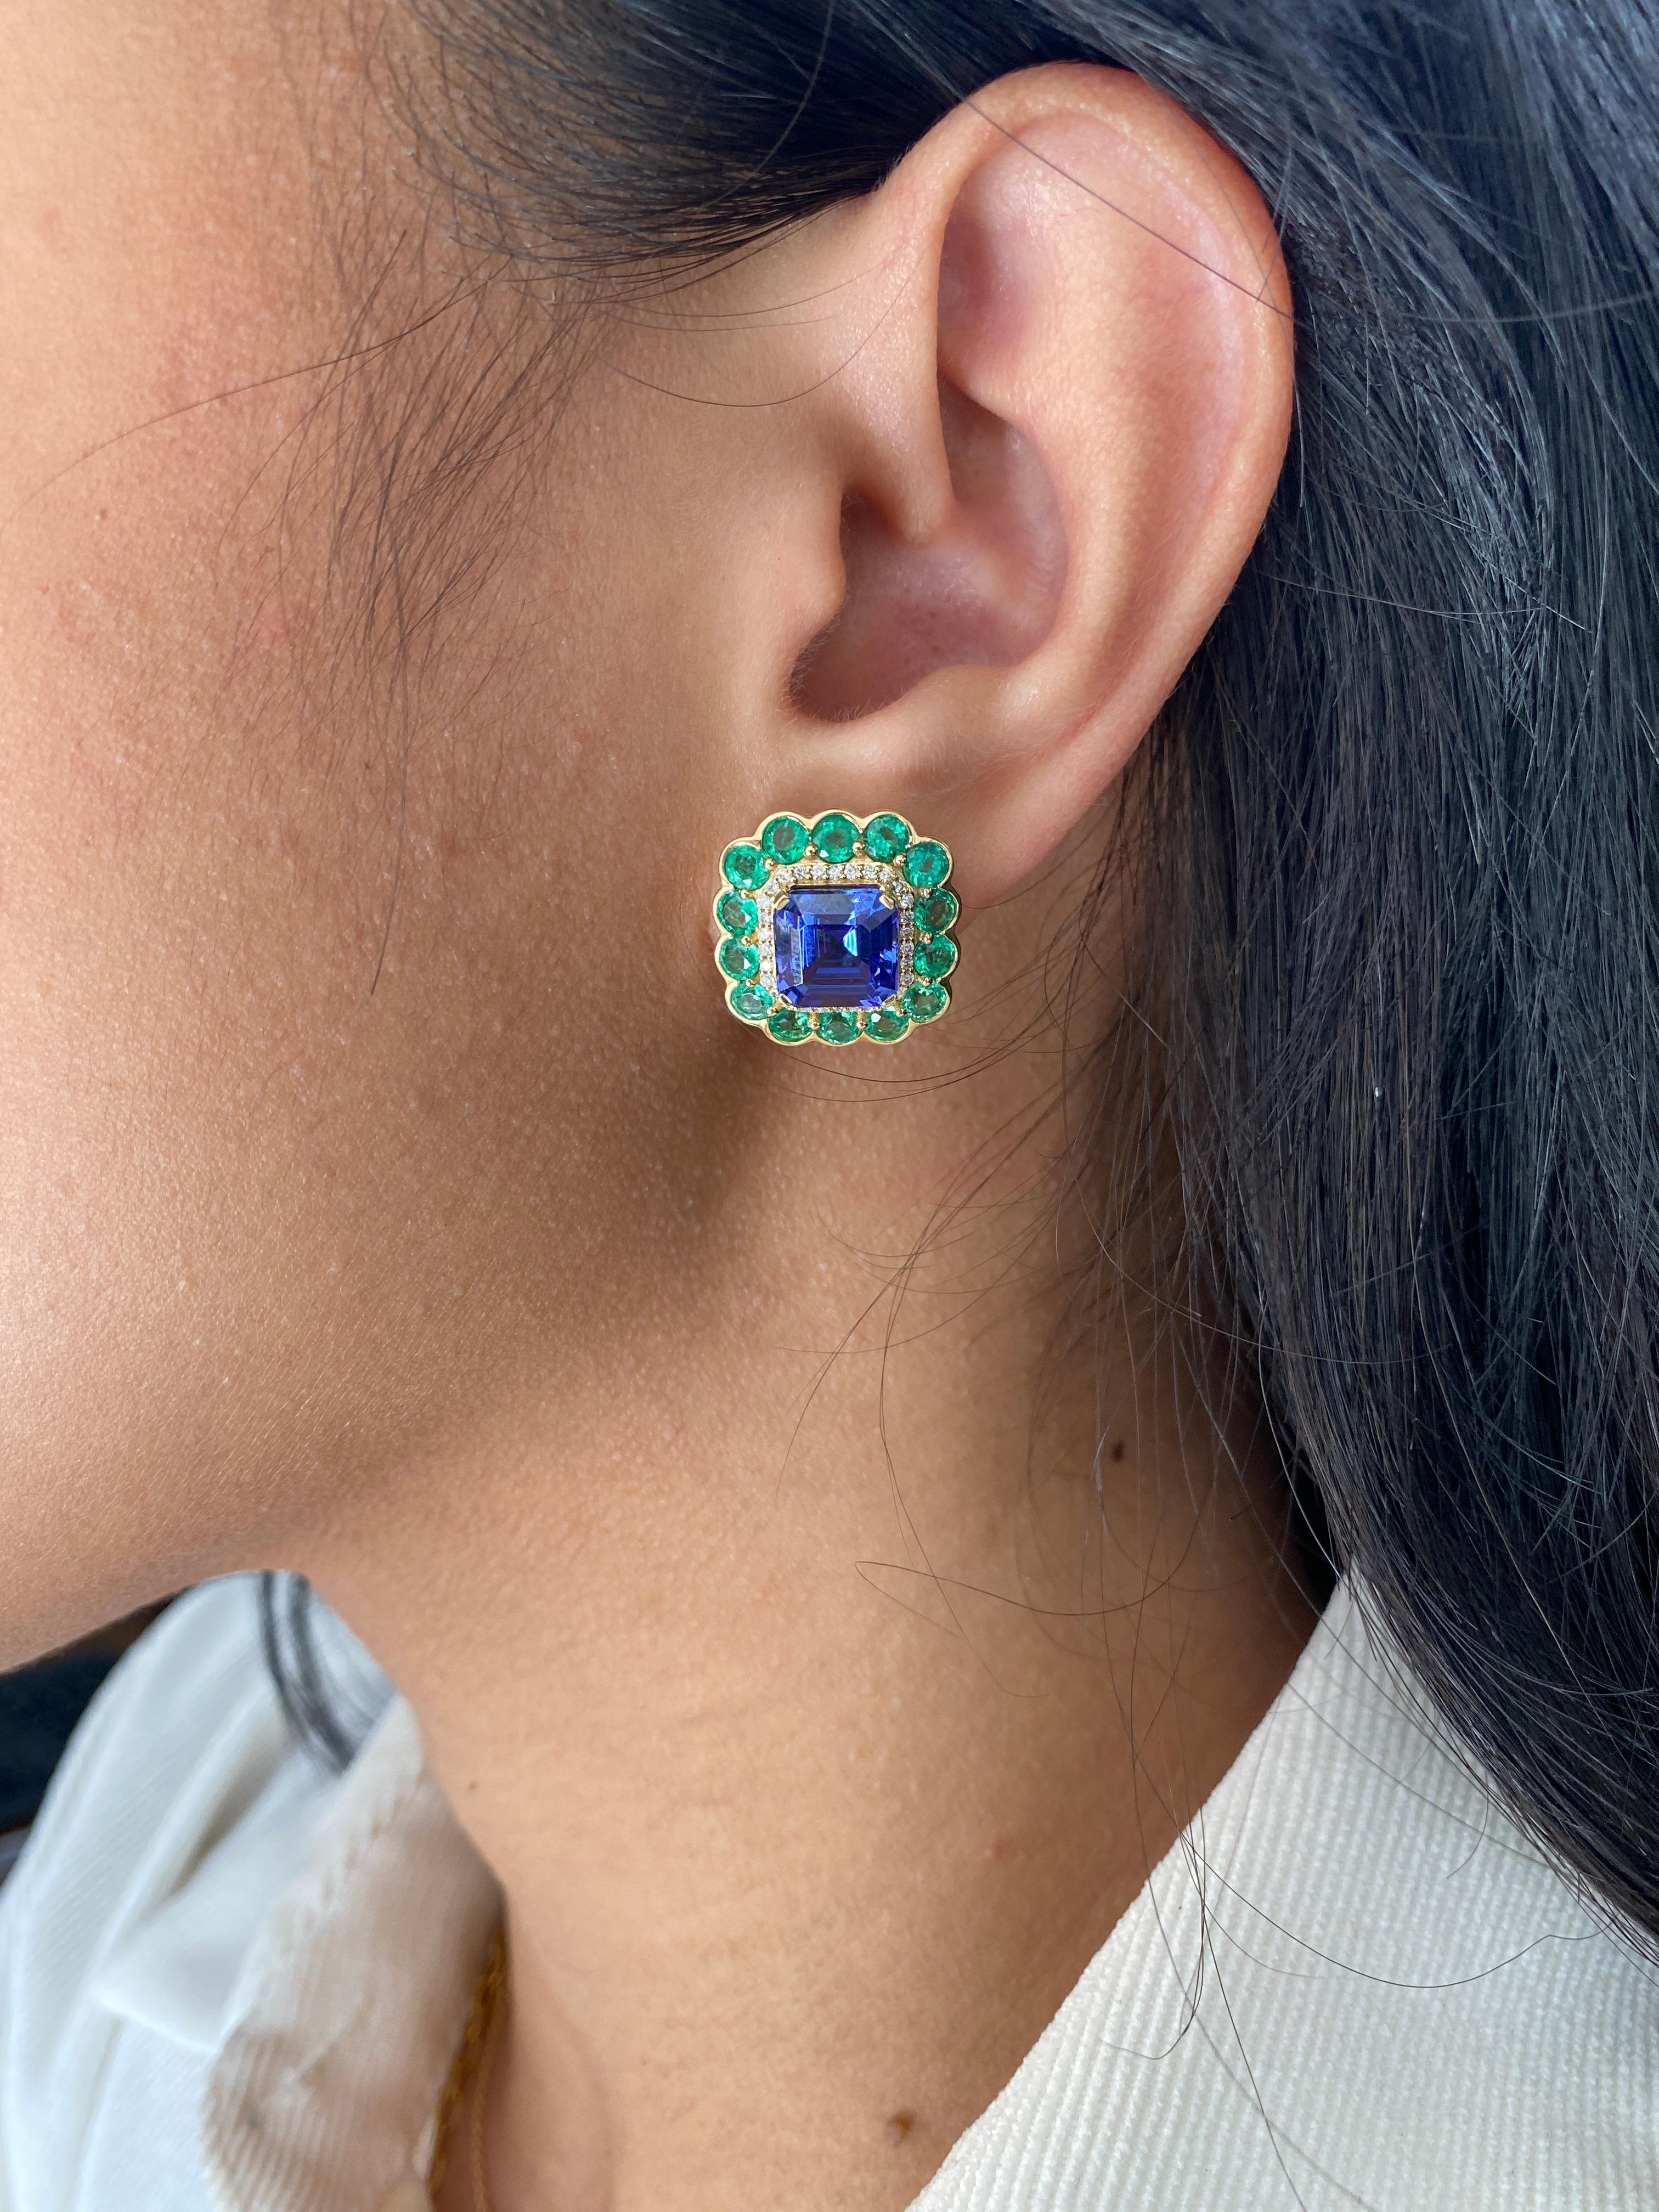 Unique Tanzanite and Emerald Stud Earrings with Diamonds in 18K Yellow Gold, from 'G-One' Collection. Our G-One Collection undeniably carries the most special pieces of Goshwara. The sought-after, one-of-a-kind pieces speak to each unique